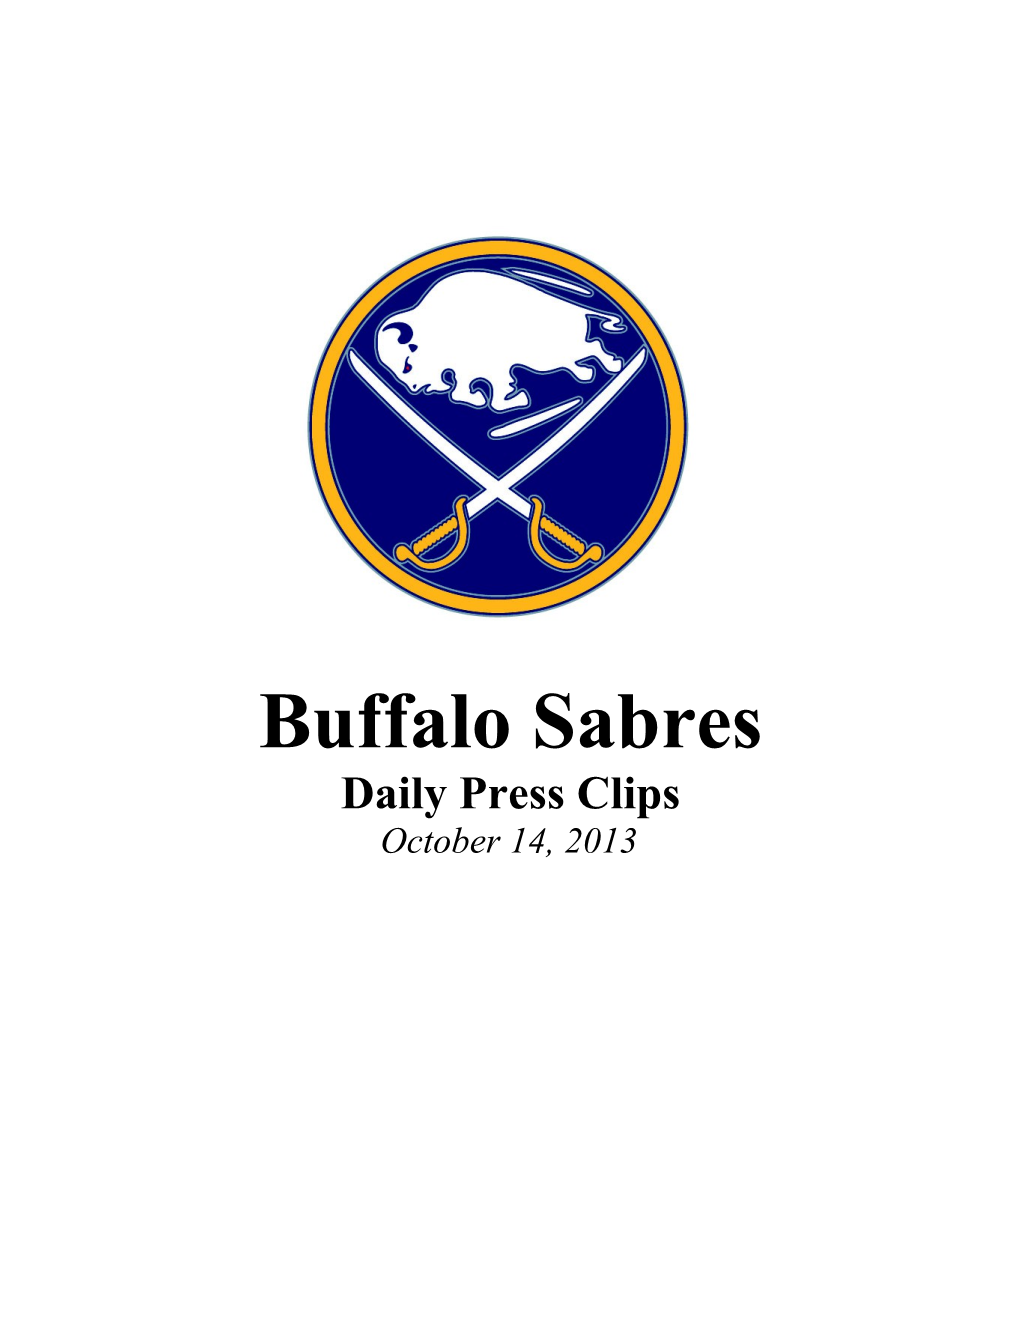 Press Clips October 14, 2013 Wild-Sabres Preview by Kevin Chroust Associated Press October 13, 2013